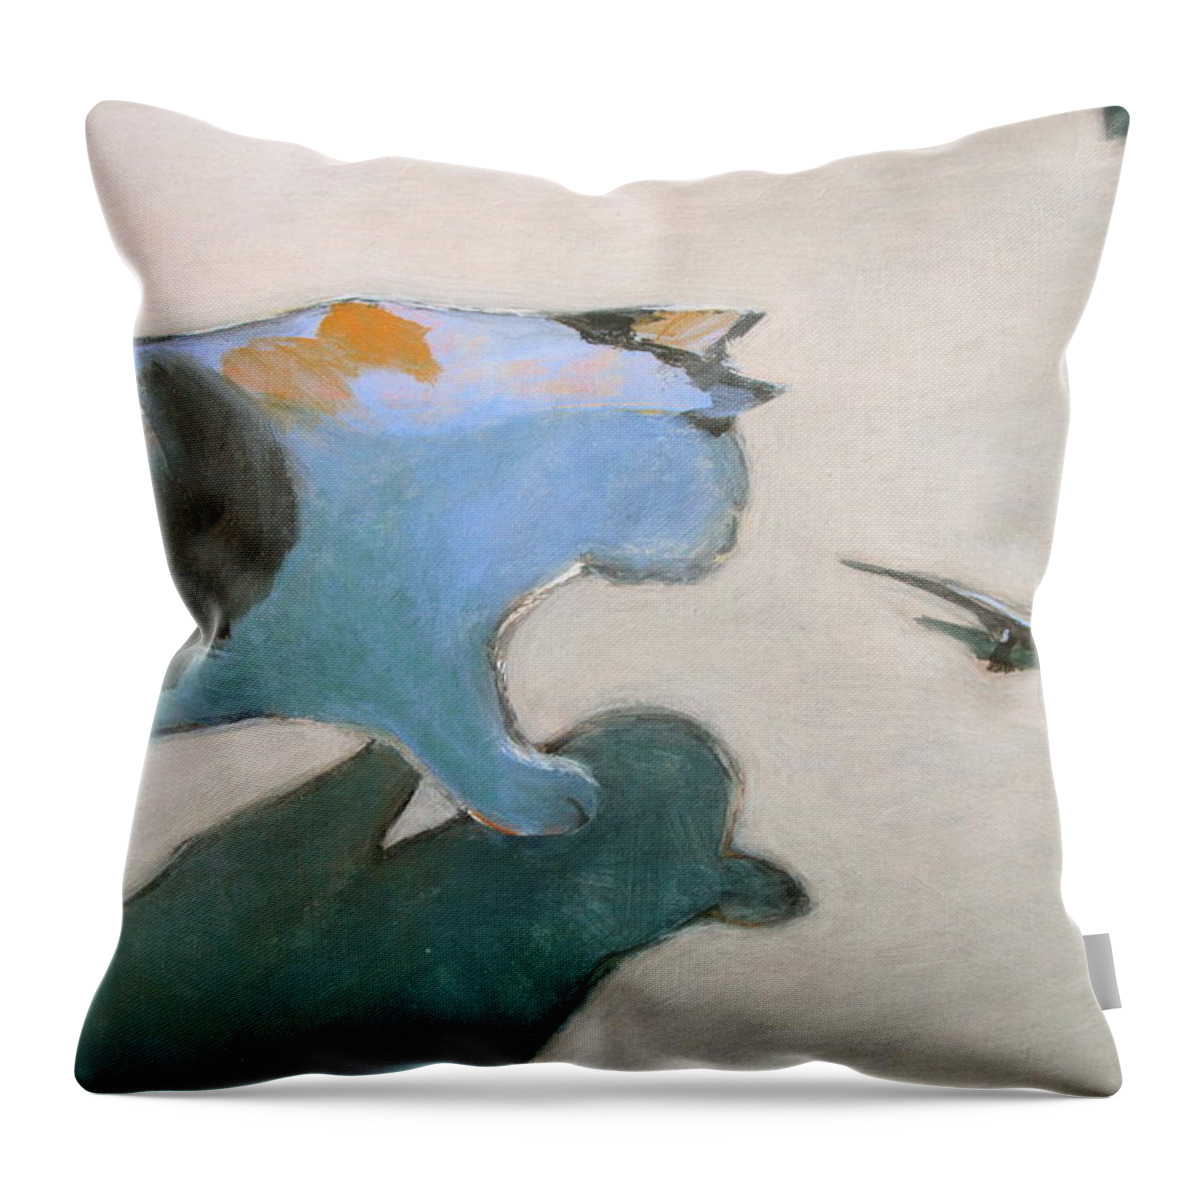 Lizard Throw Pillow featuring the painting Cat and Lizard by Kazumi Whitemoon